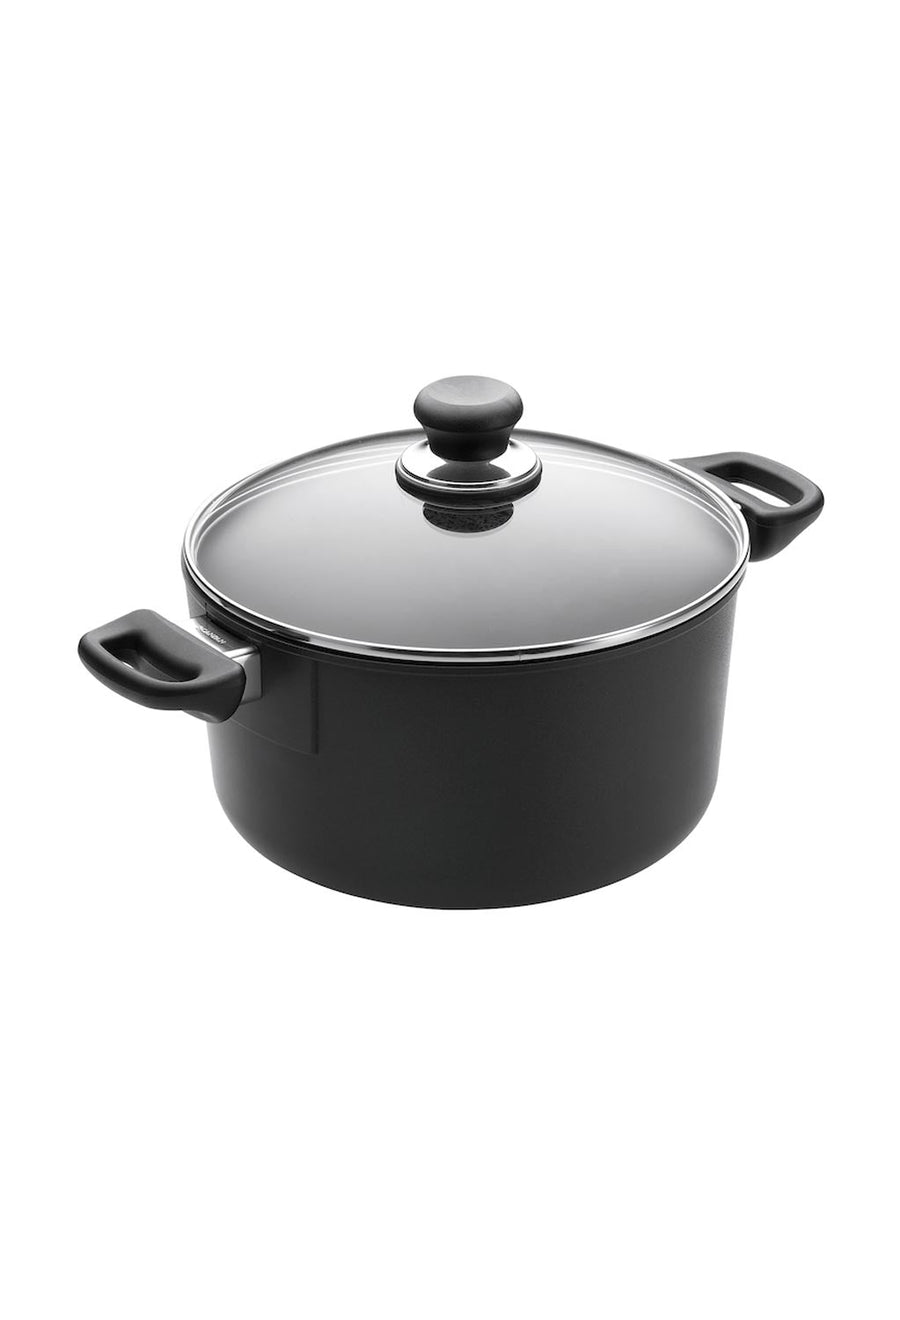 Scanpan Classic Dutch Oven with lid